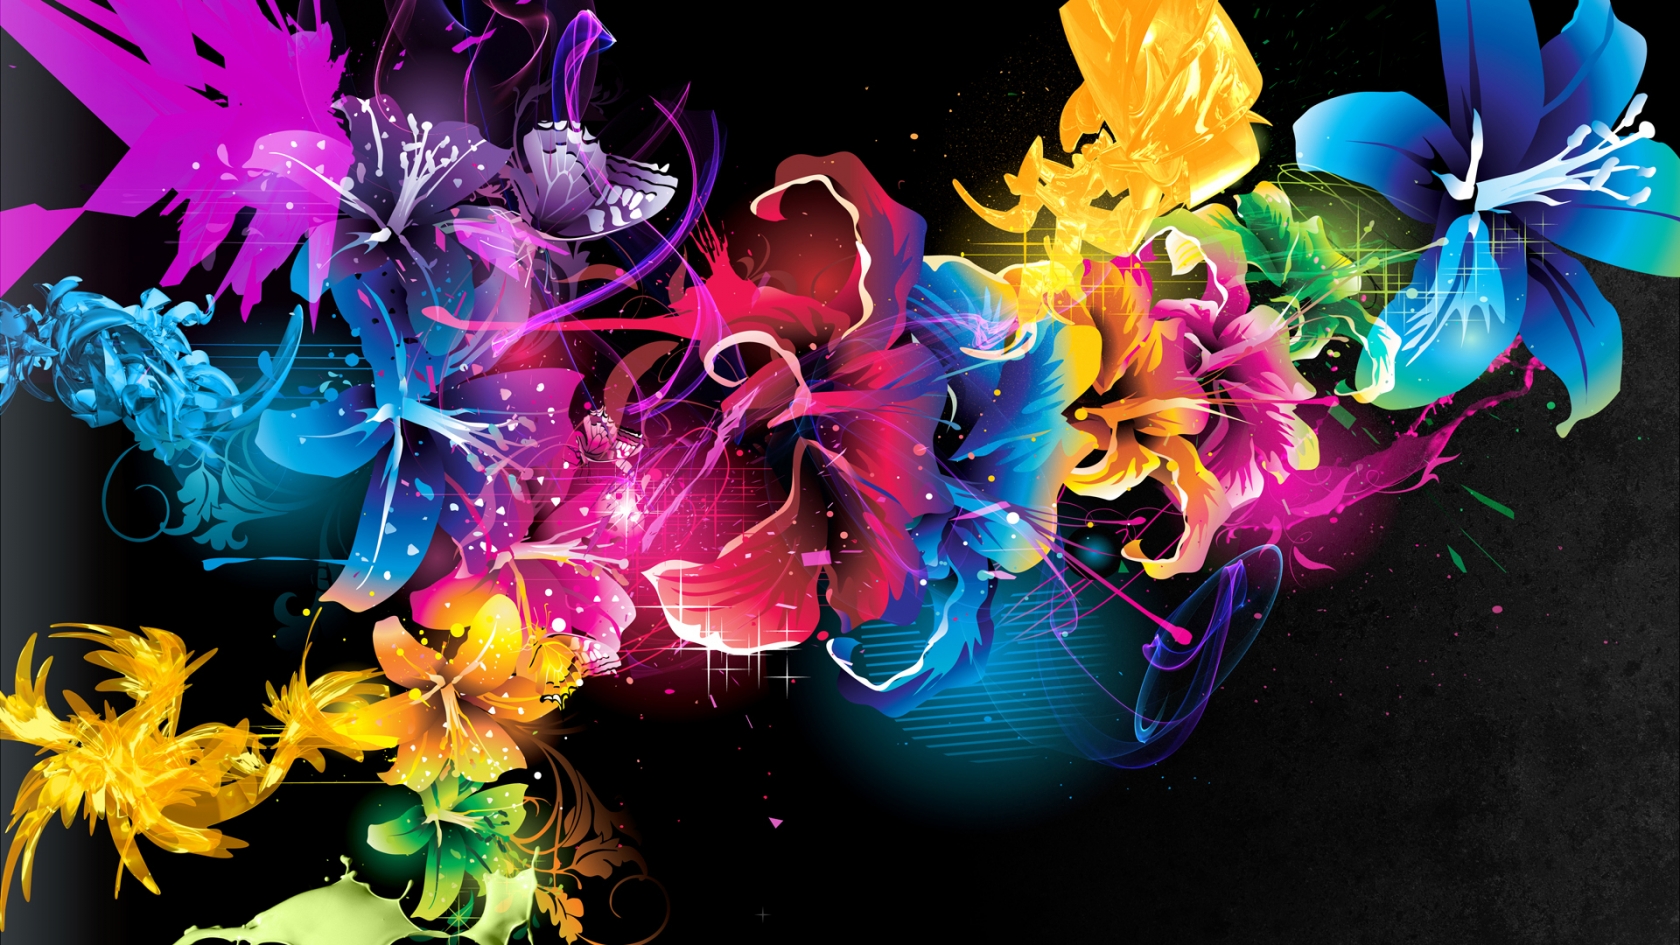 Beautiful Fractal Flowers for 1680 x 945 HDTV resolution